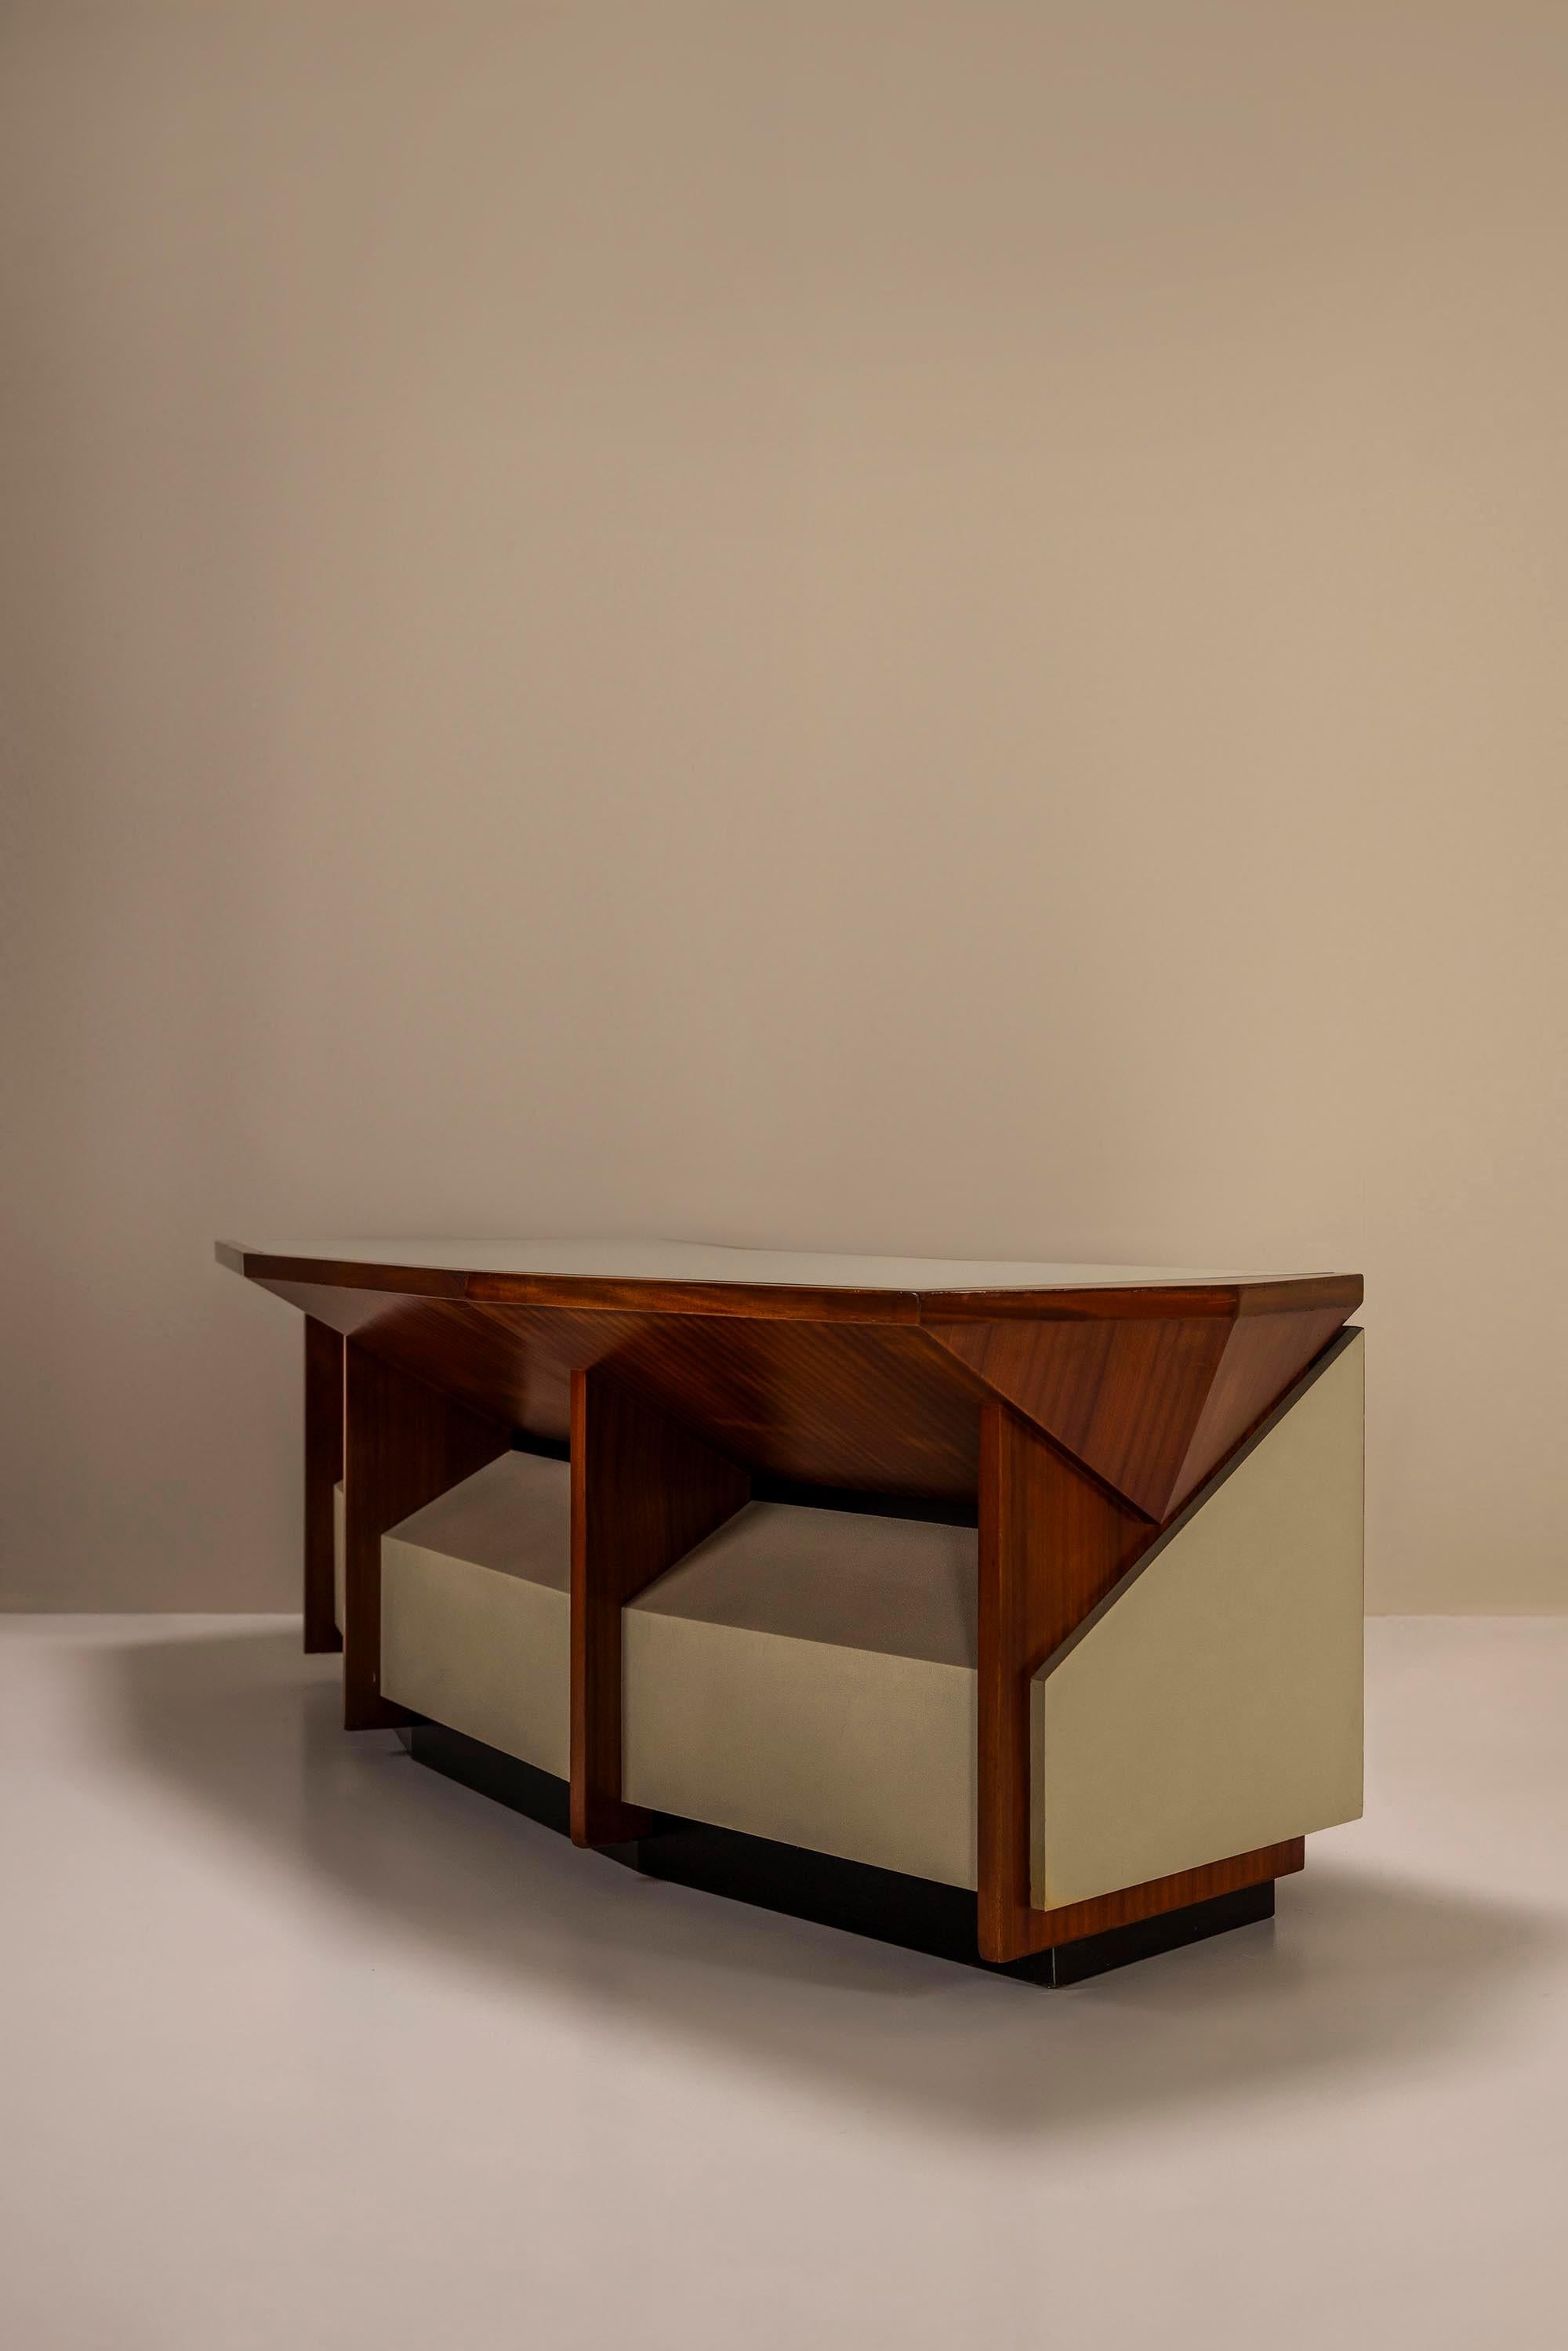 This astonishing desk from the 1960s defies the conventions of design and provides a dazzling lesson in how a desk can be created. A number of things come together such as traditional woodworking, new materials, and daring design that has been